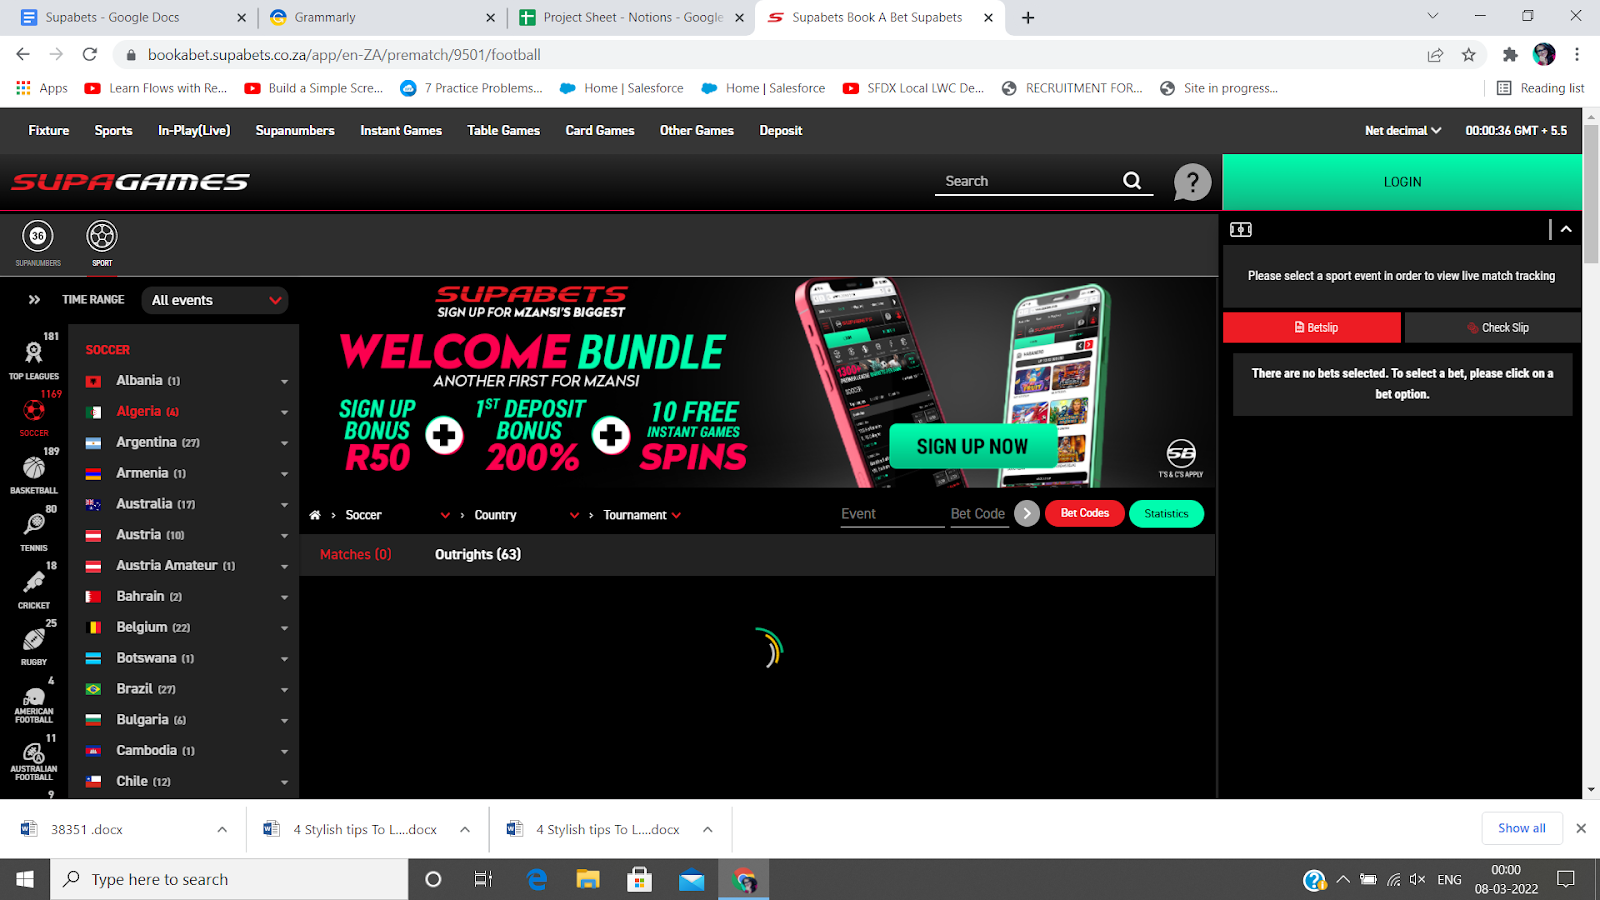 Web page of the web version of Supabets site.